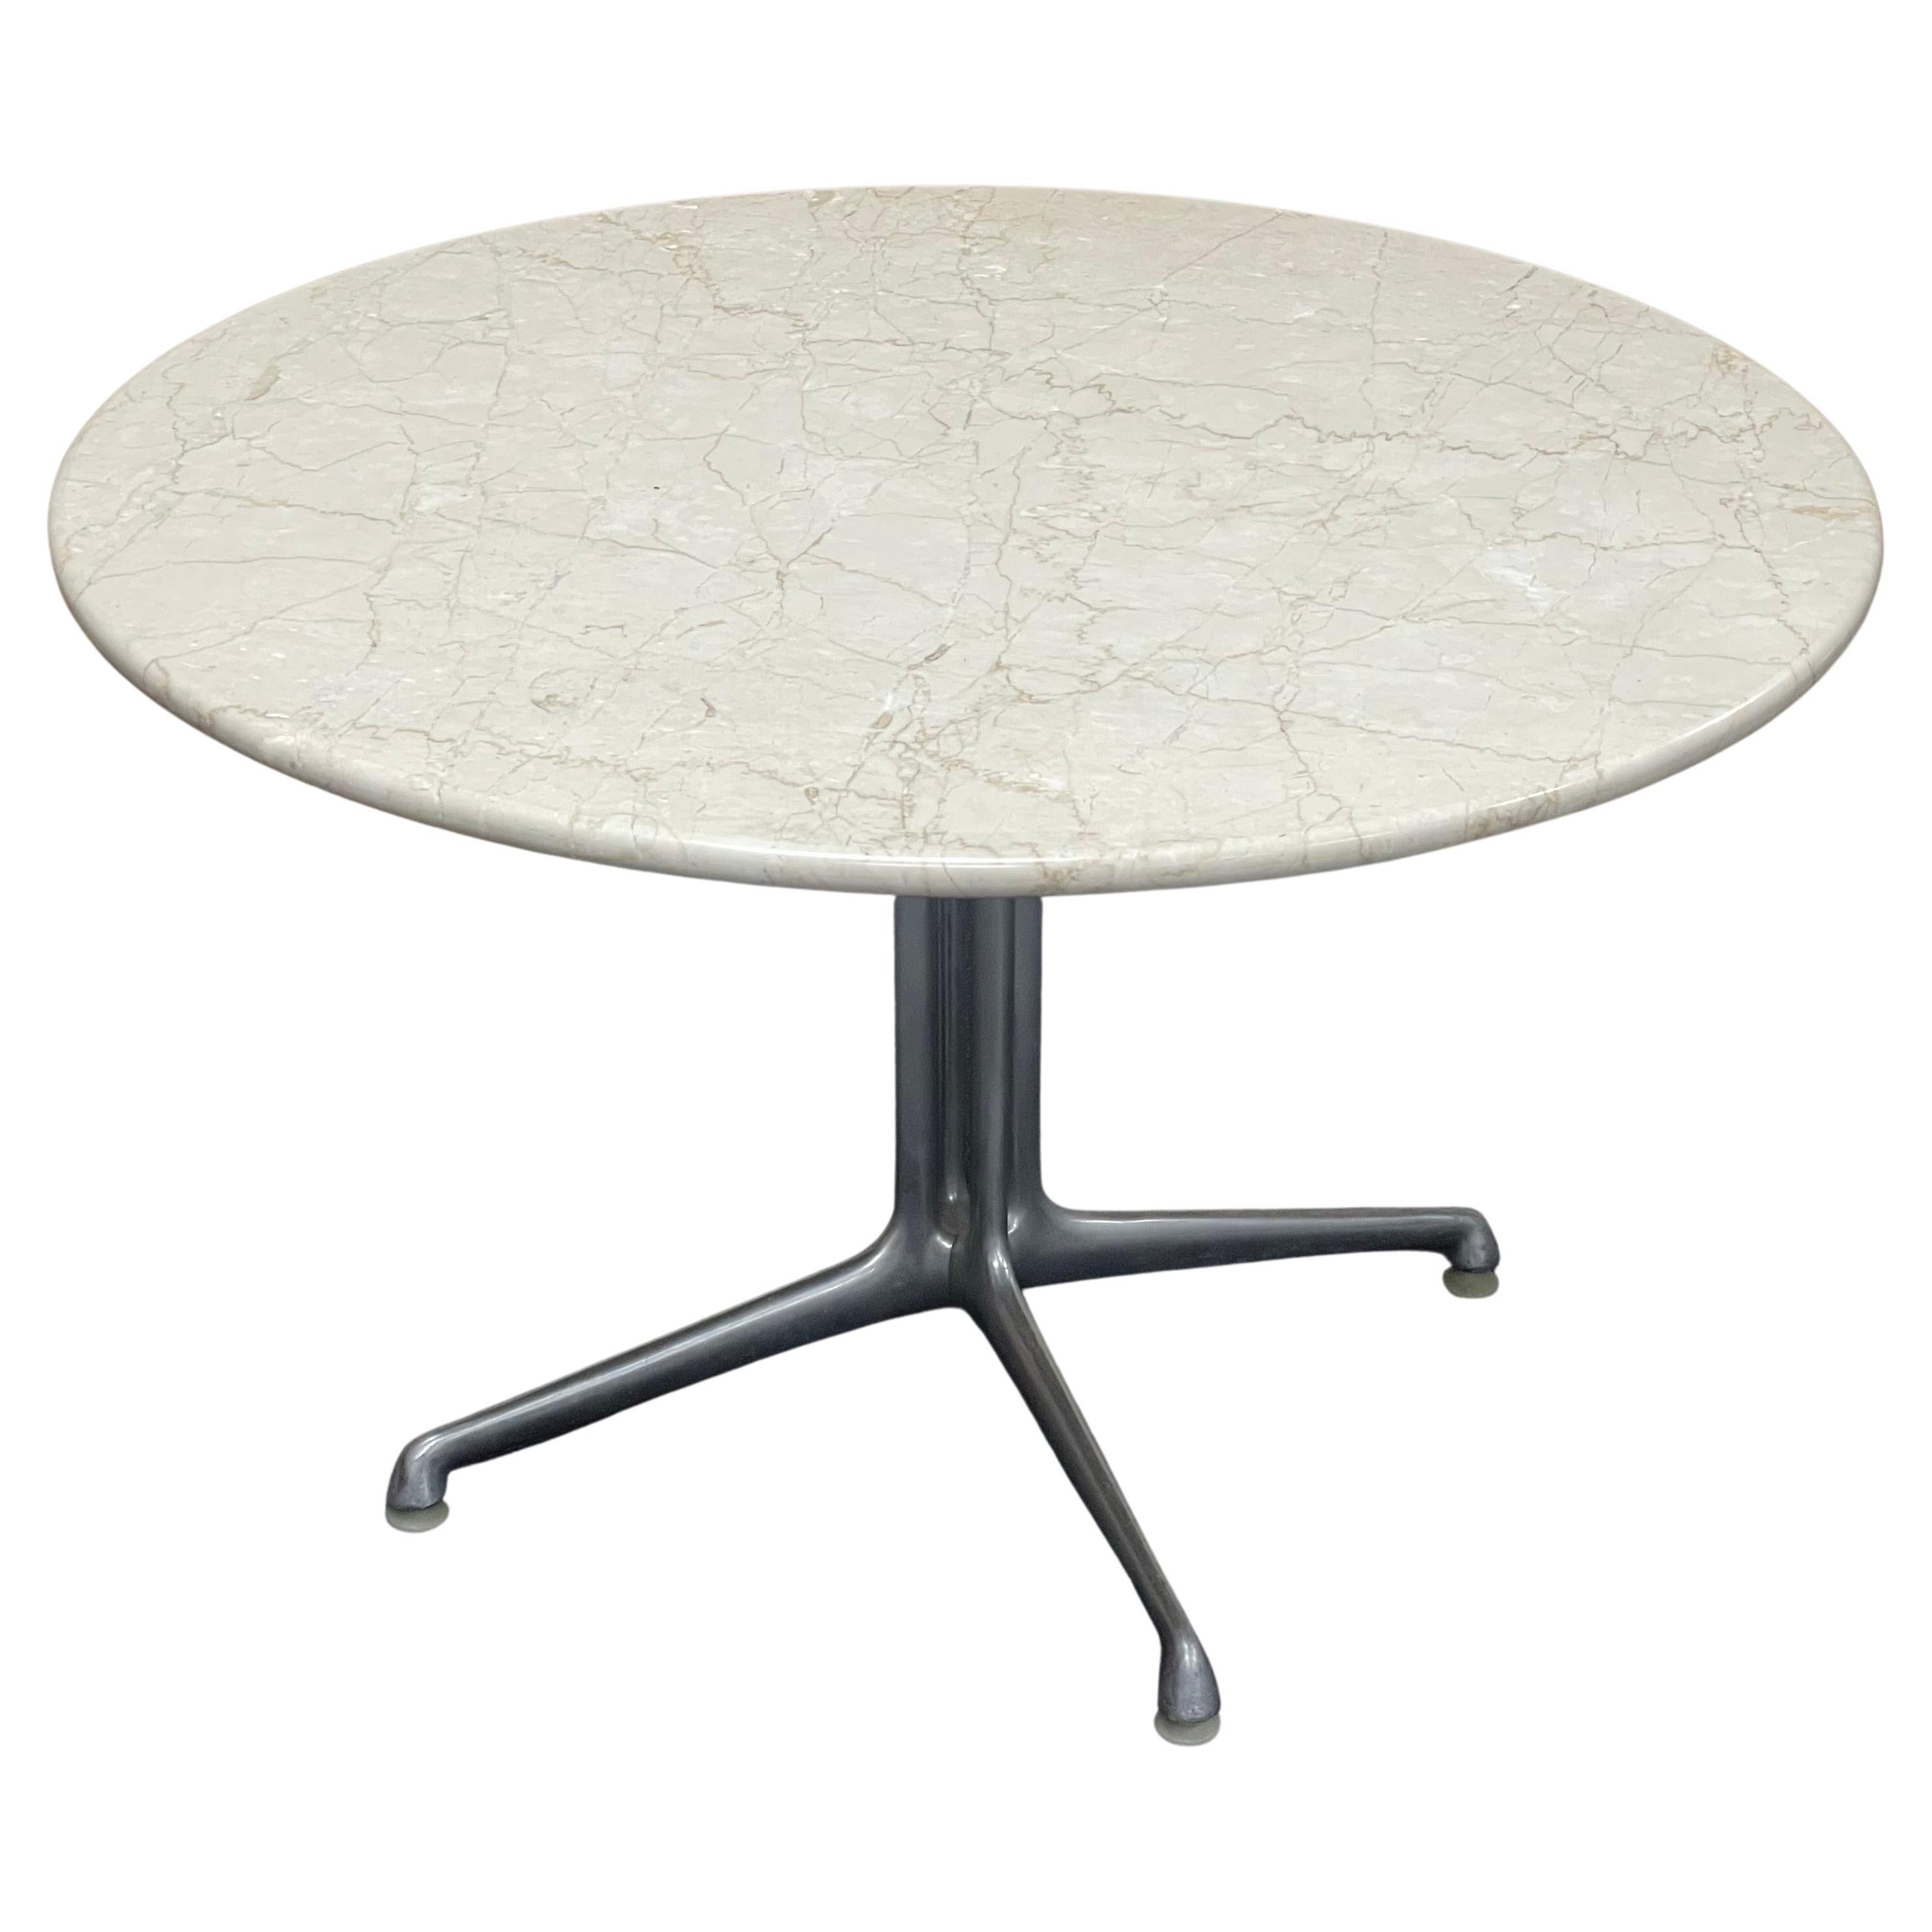 "La Fonda" Marble Top Coffee Table by Charles & Ray Eames for Herman Miller